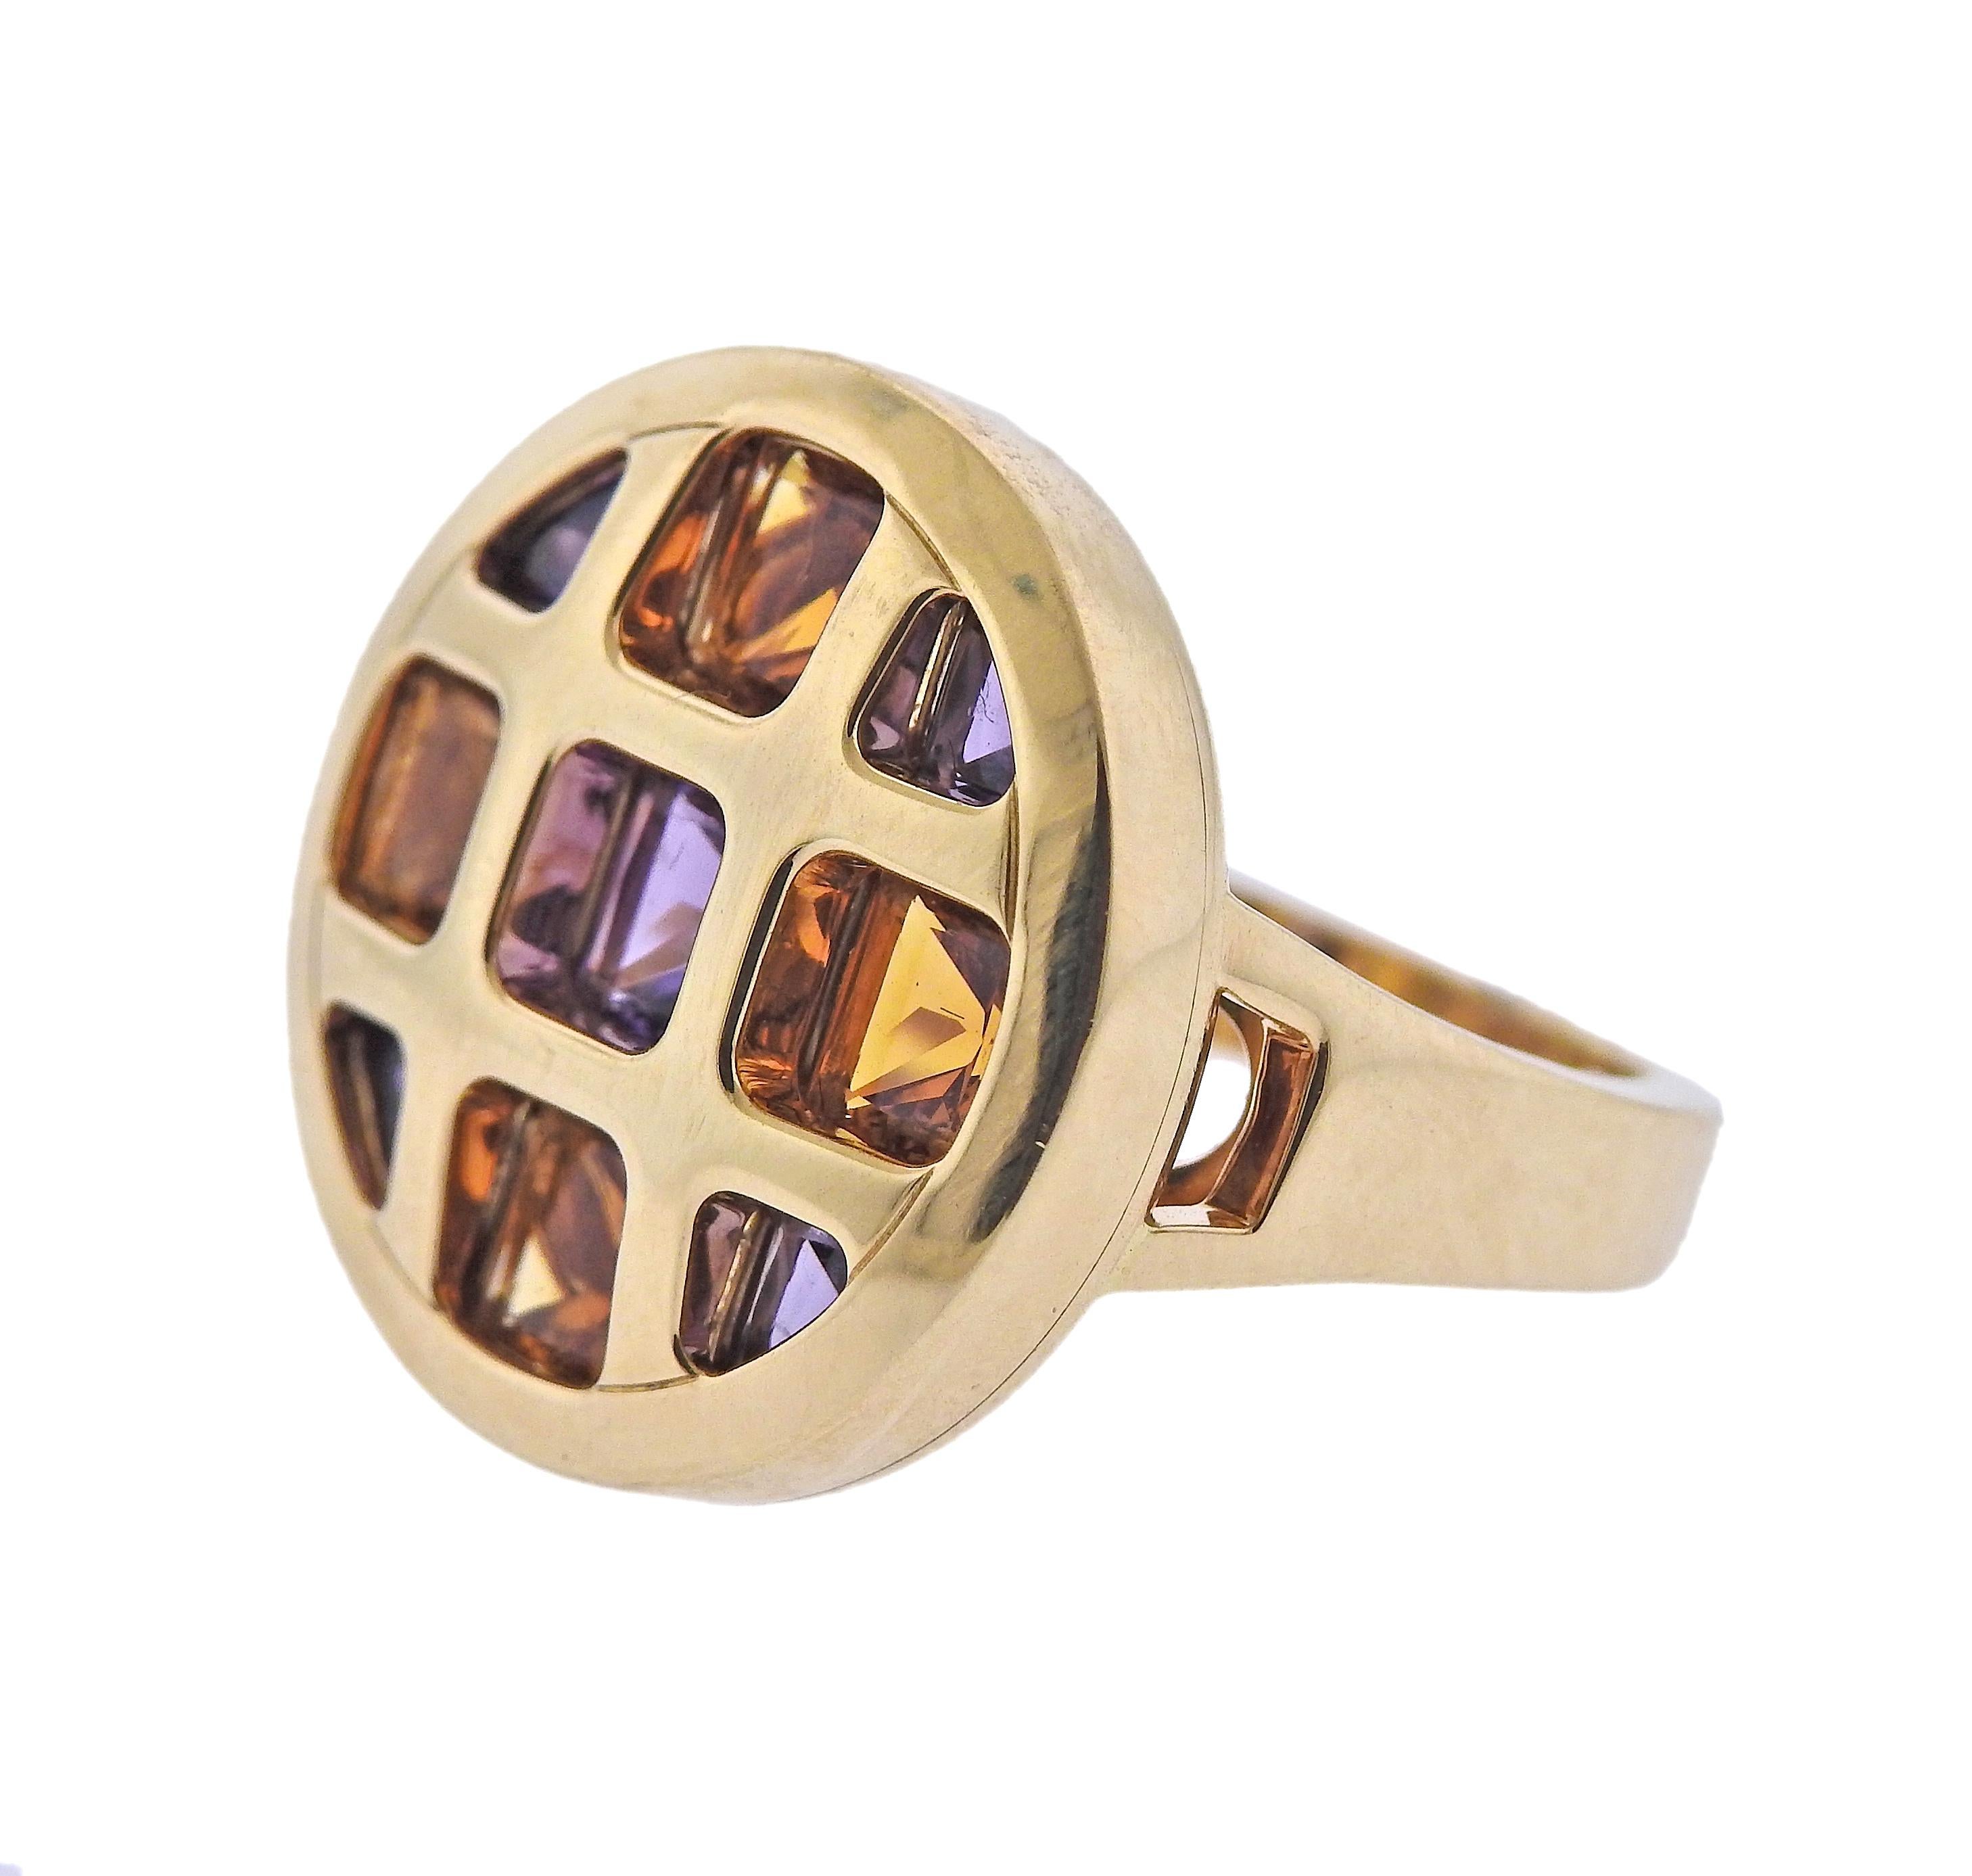 18k yellow gold Cartier Pasha ring, with amethysts and citrines. Ring size - 5.5 (sizing balls ca be removed to increase the size). Ring top is 20mm in diameter. Marked: Cartier, 750, NV4119, 54. Weight - 15.9 grams.